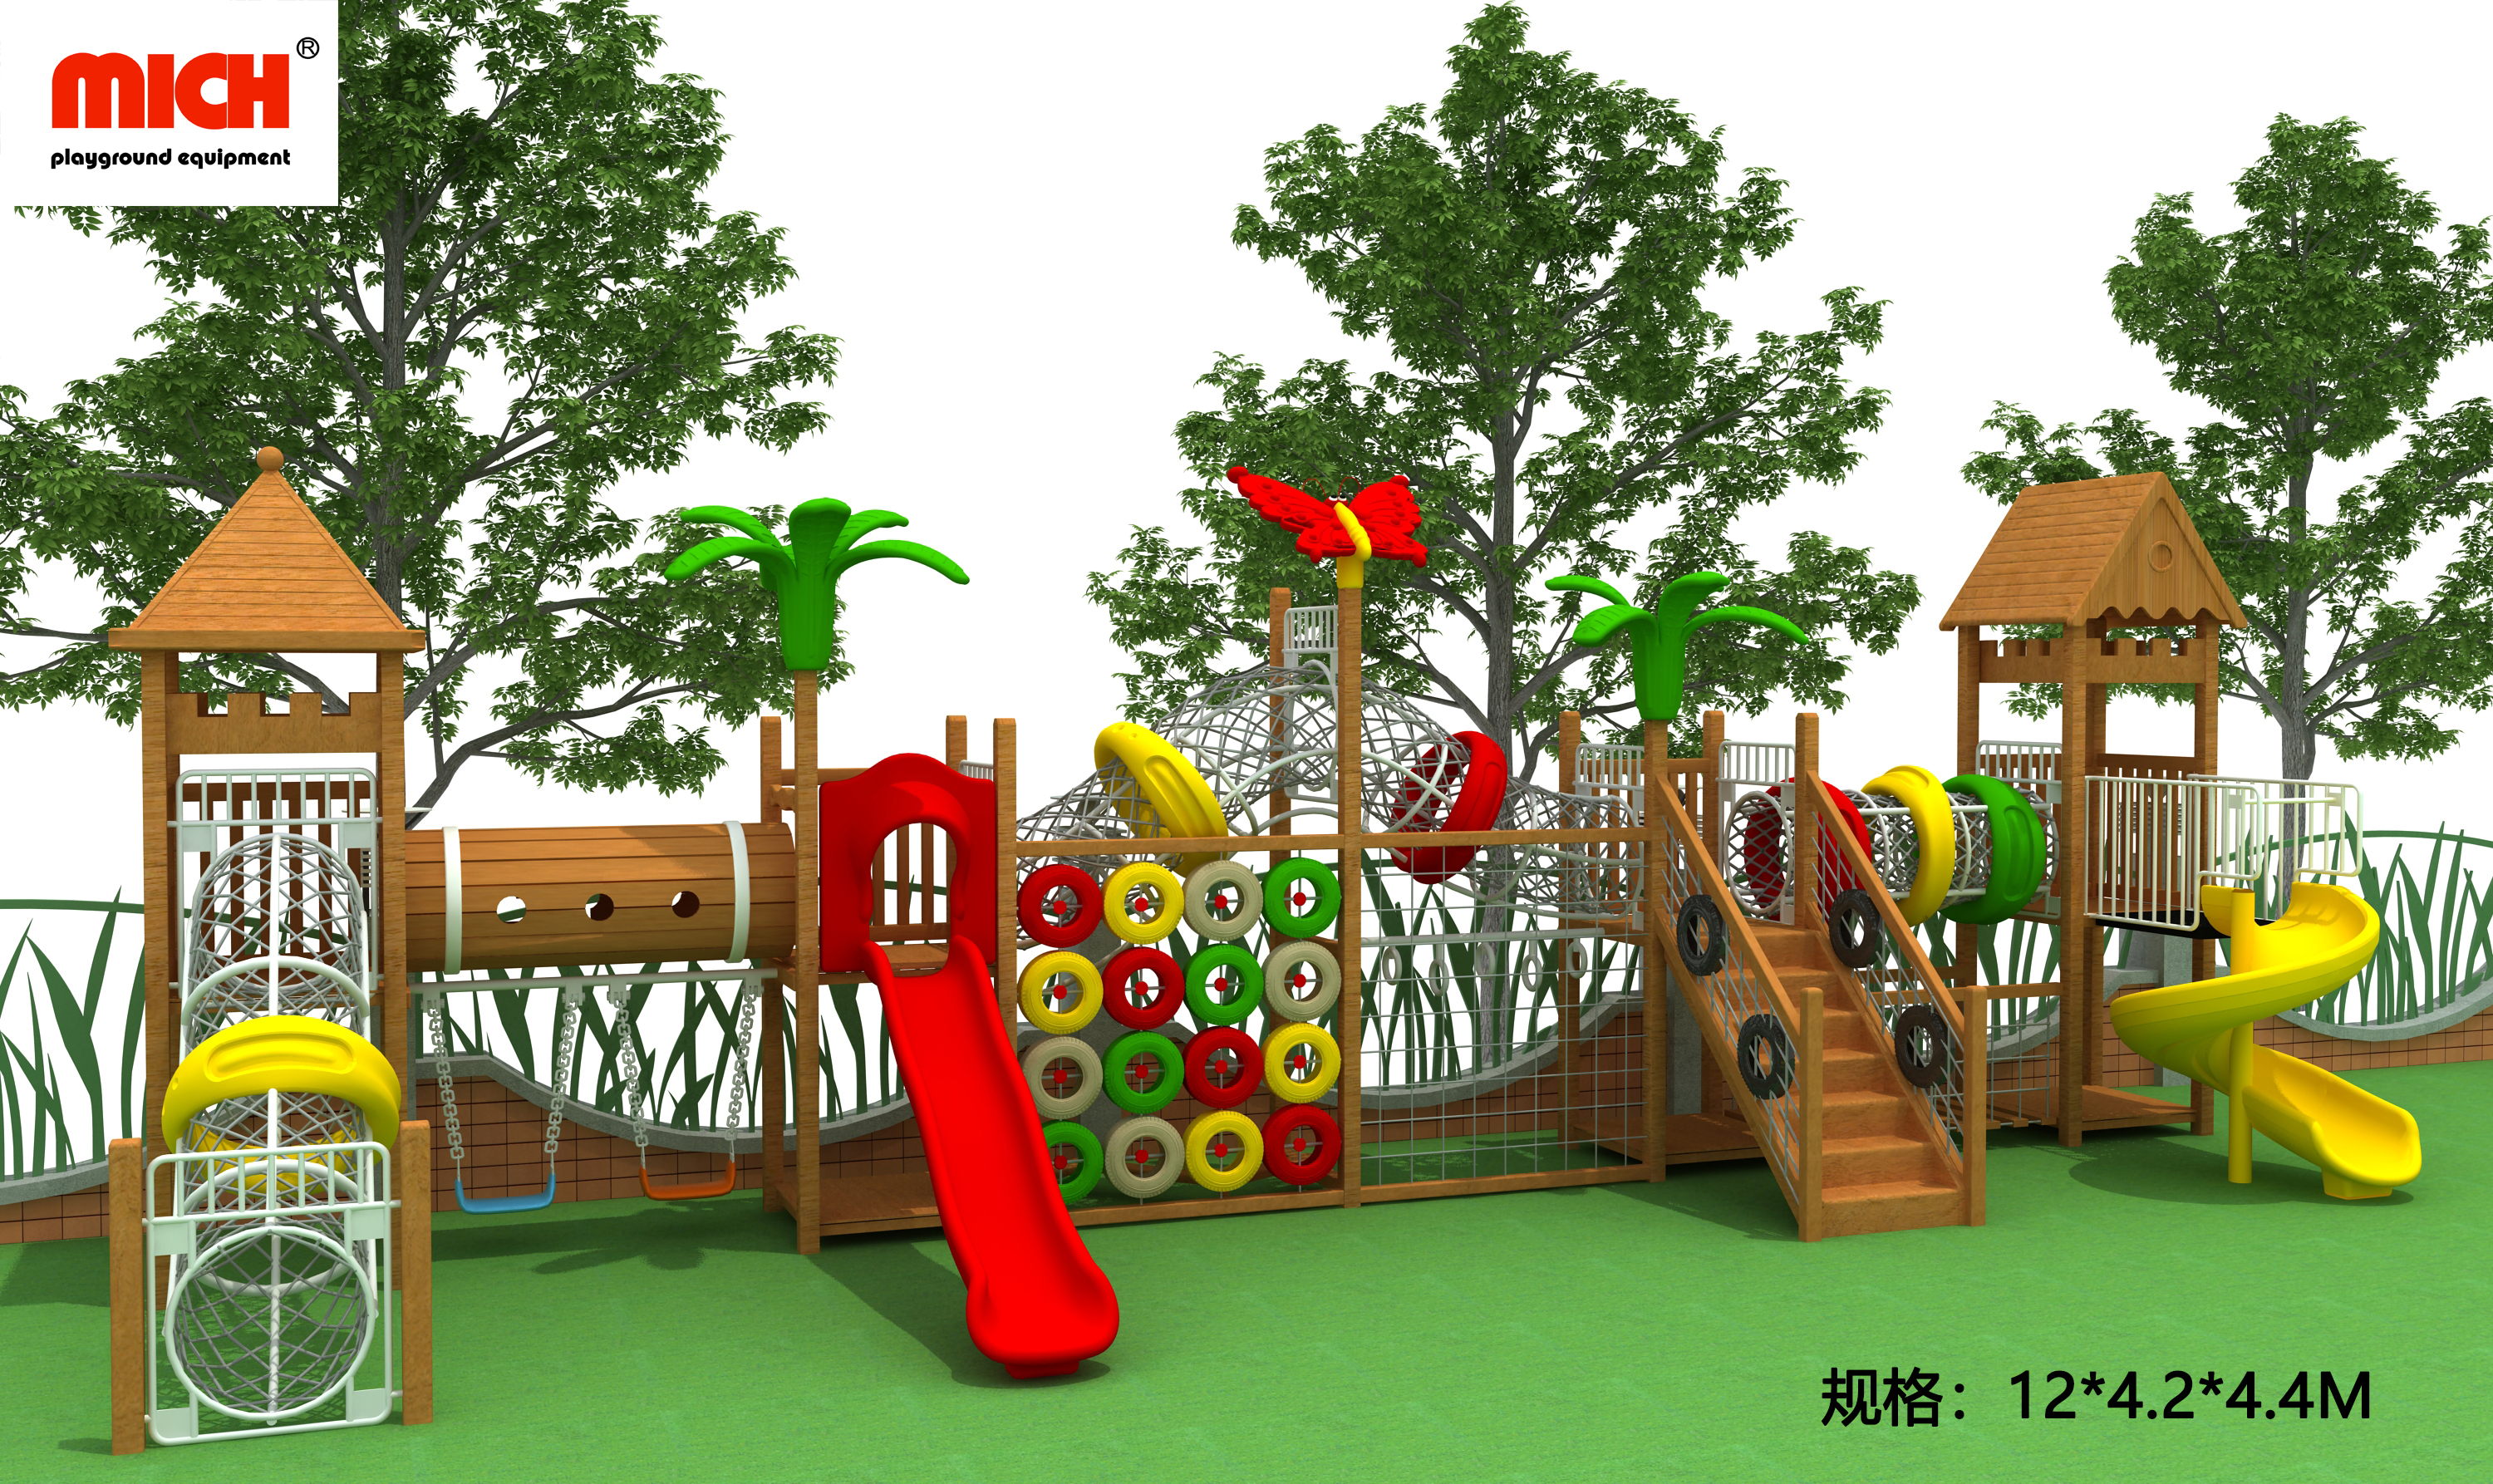 Who is suitable for outdoor playground equipment?